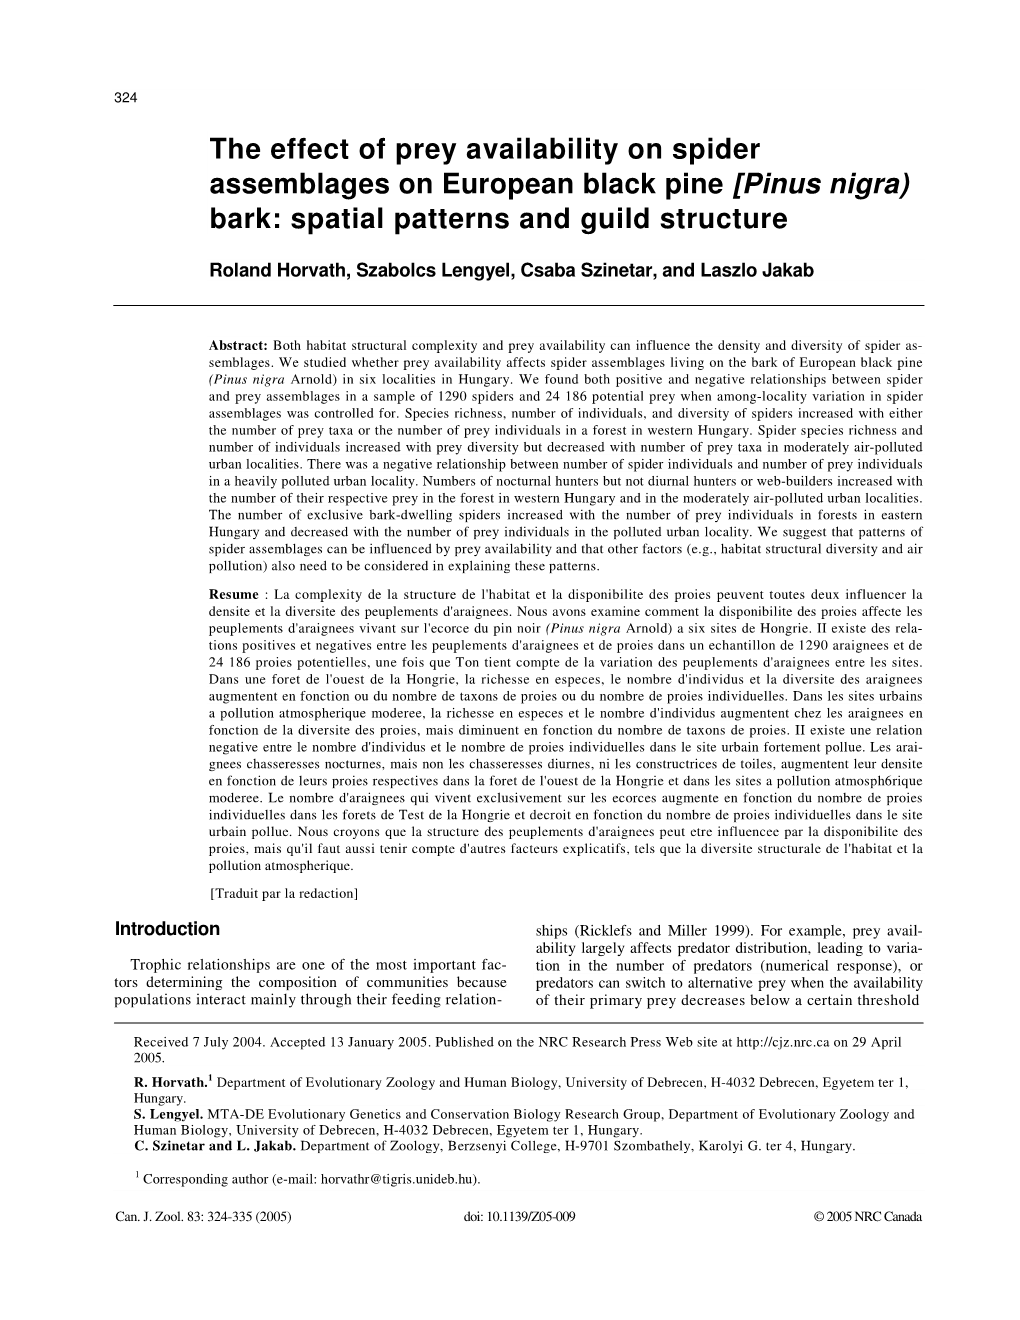 The Effect of Prey Availability on Spider Assemblages on European Black Pine [Pinus Nigra) Bark: Spatial Patterns and Guild Structure